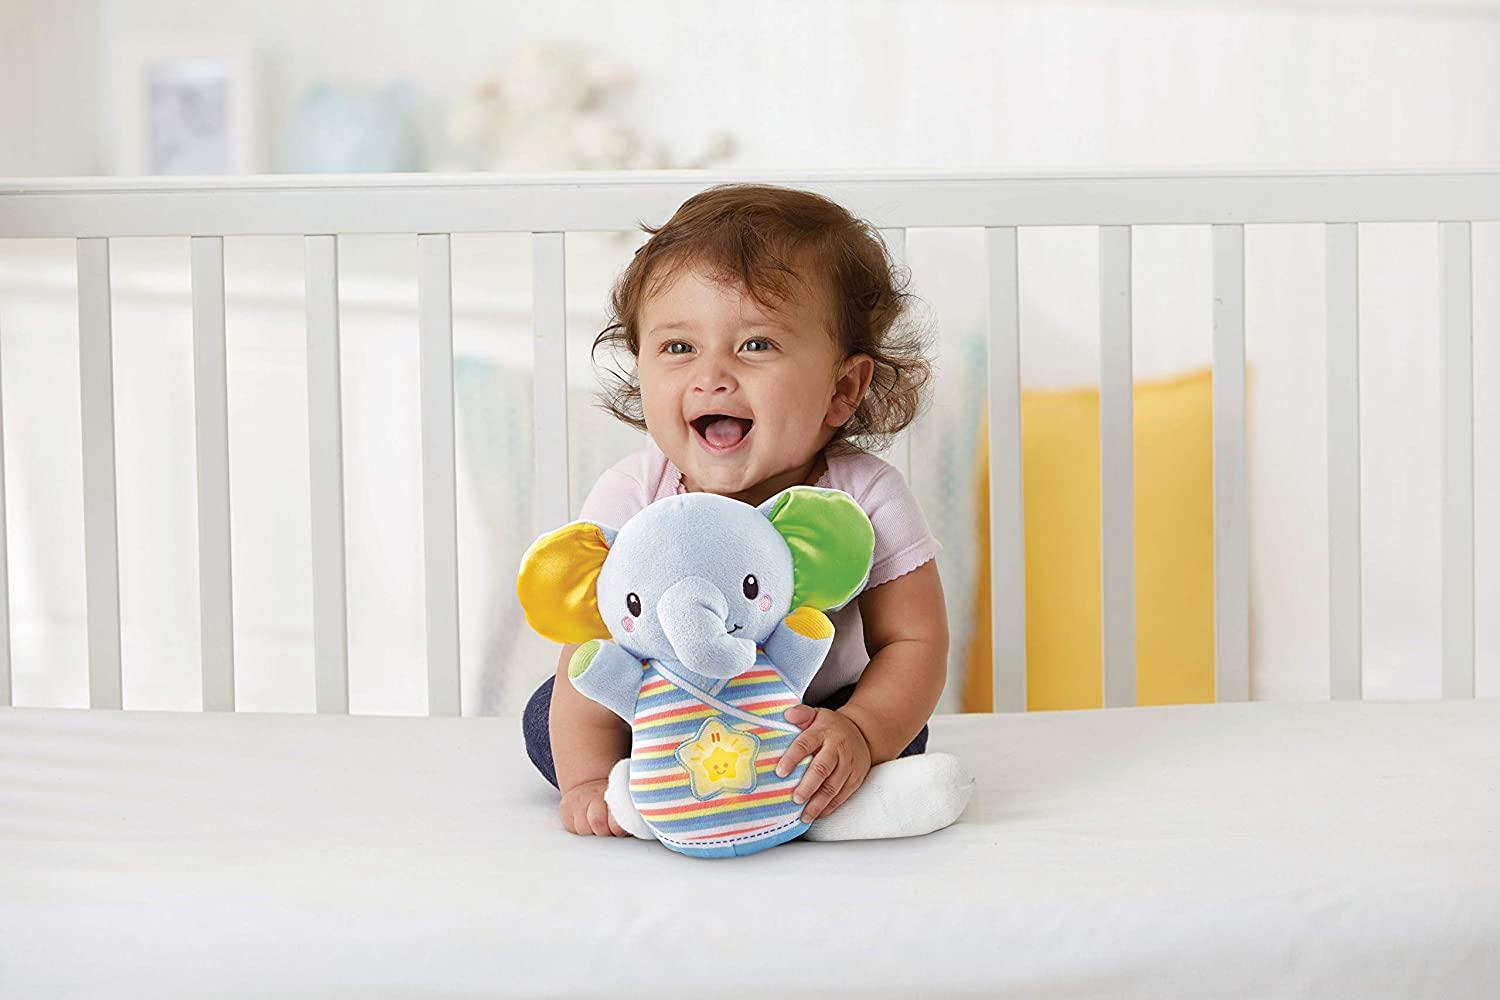 Vtech Snooze And Soothe Elephant Toymaster Ballina